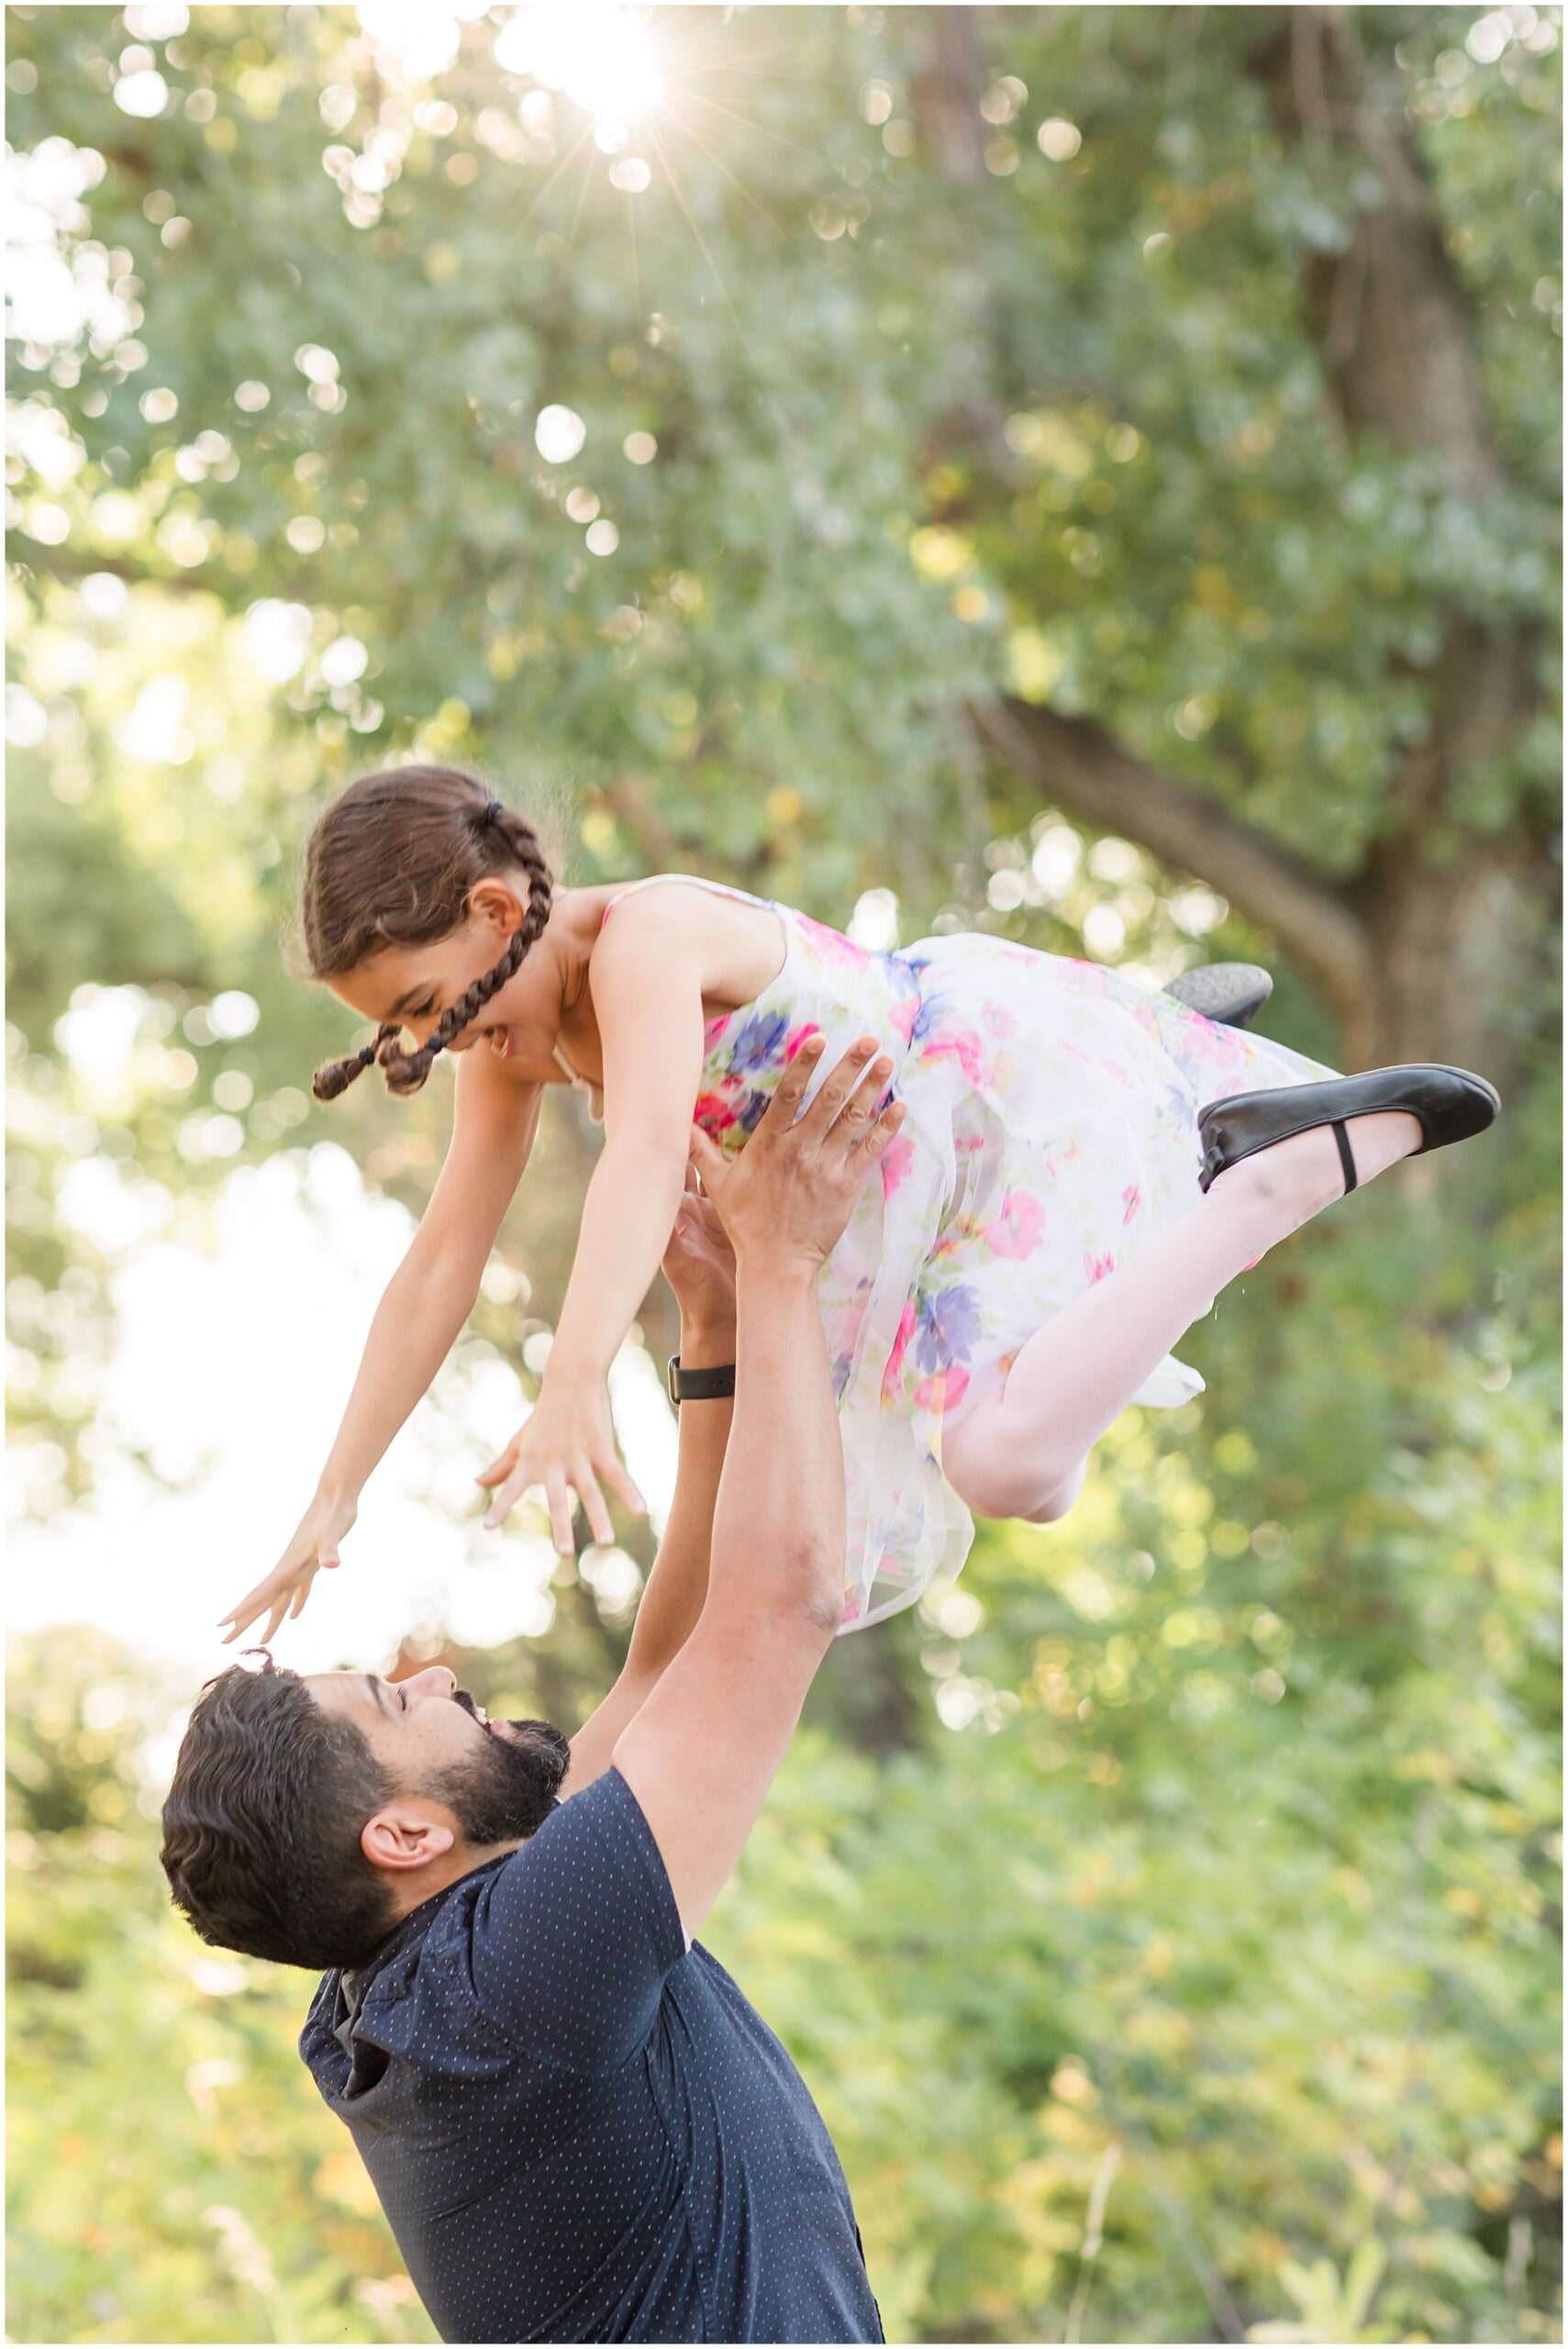 Dad and daughter share a joyful moment, captured in a mini family session by Theresa Pelser Photography